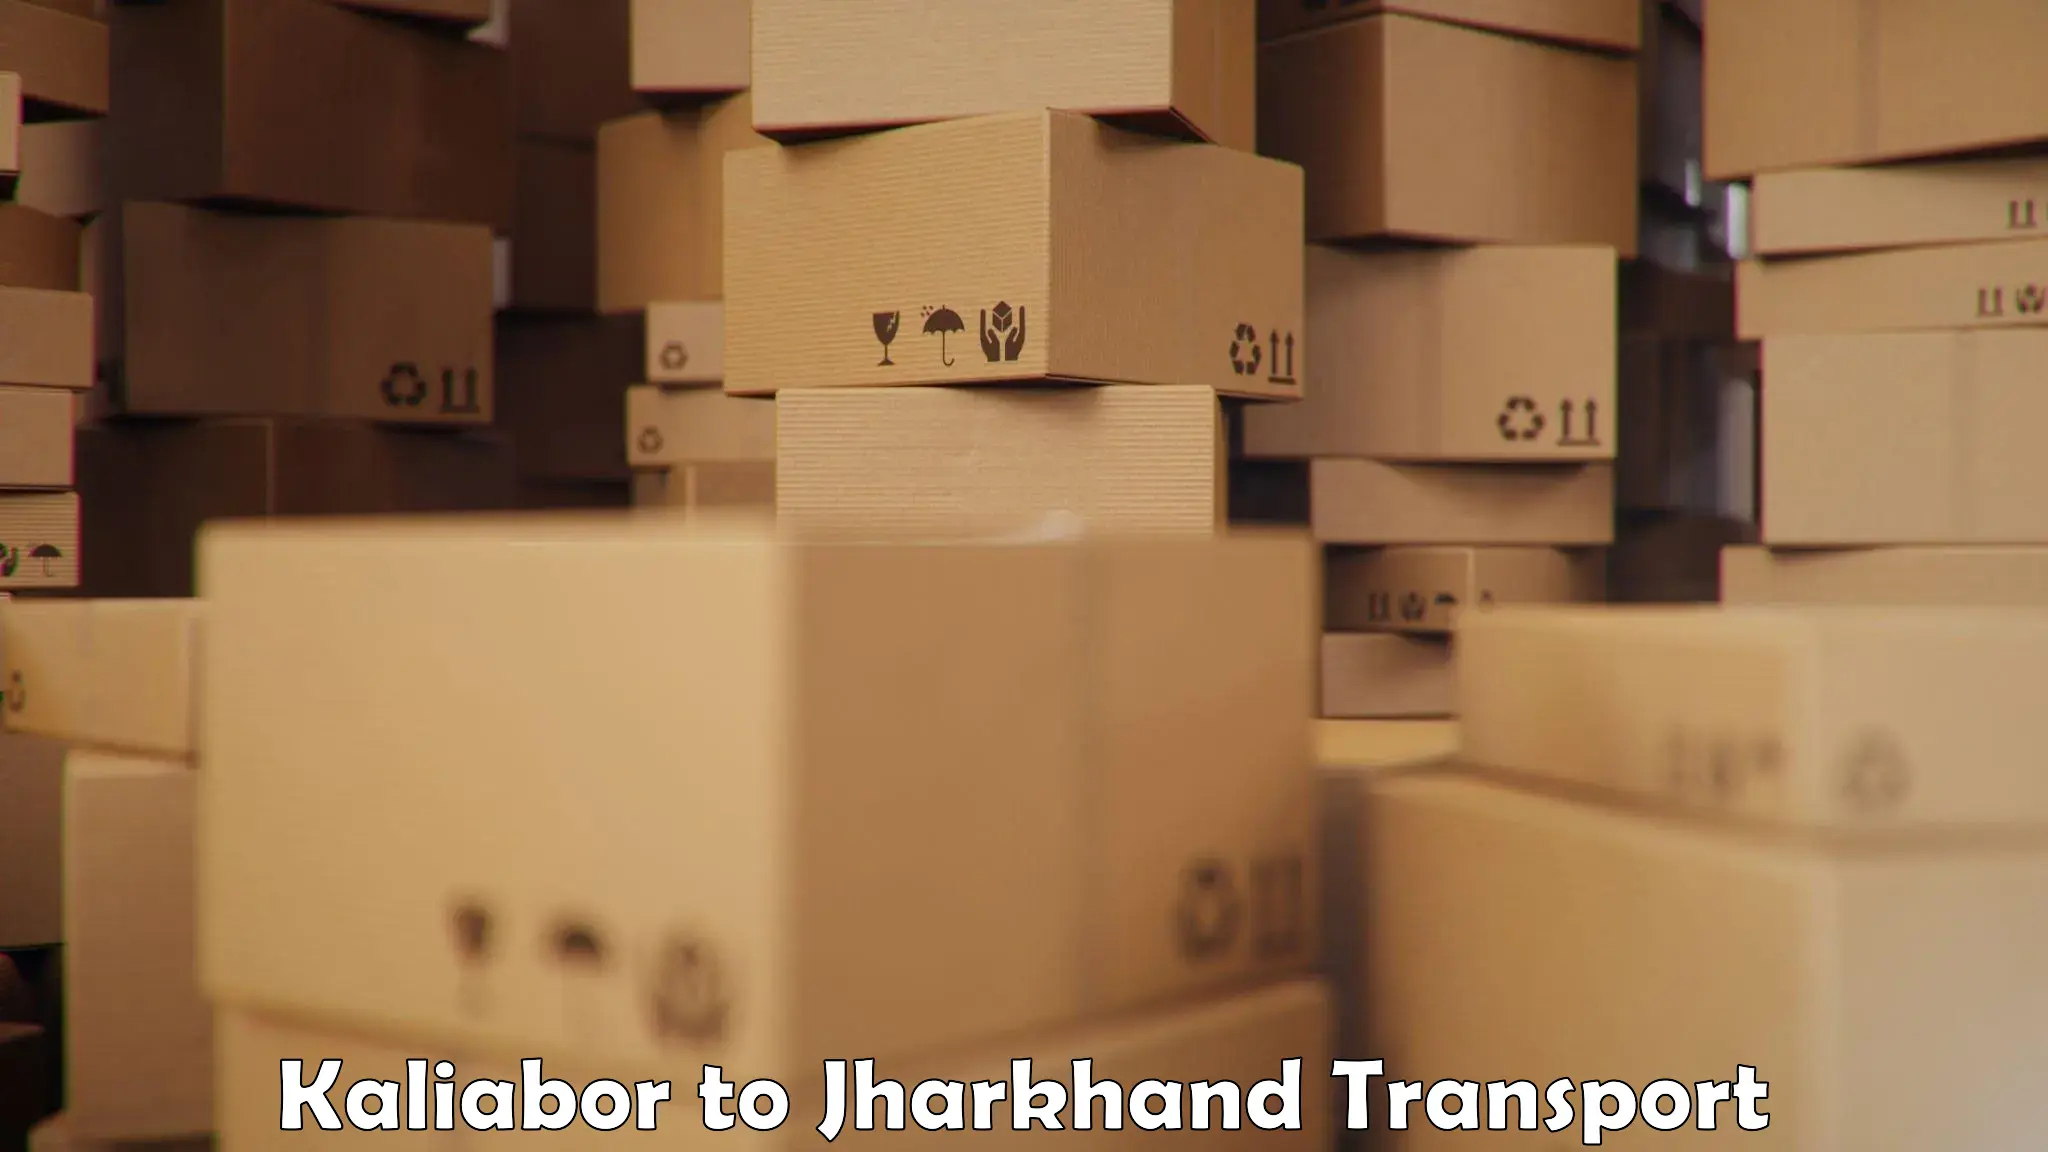 Truck transport companies in India Kaliabor to Chaibasa